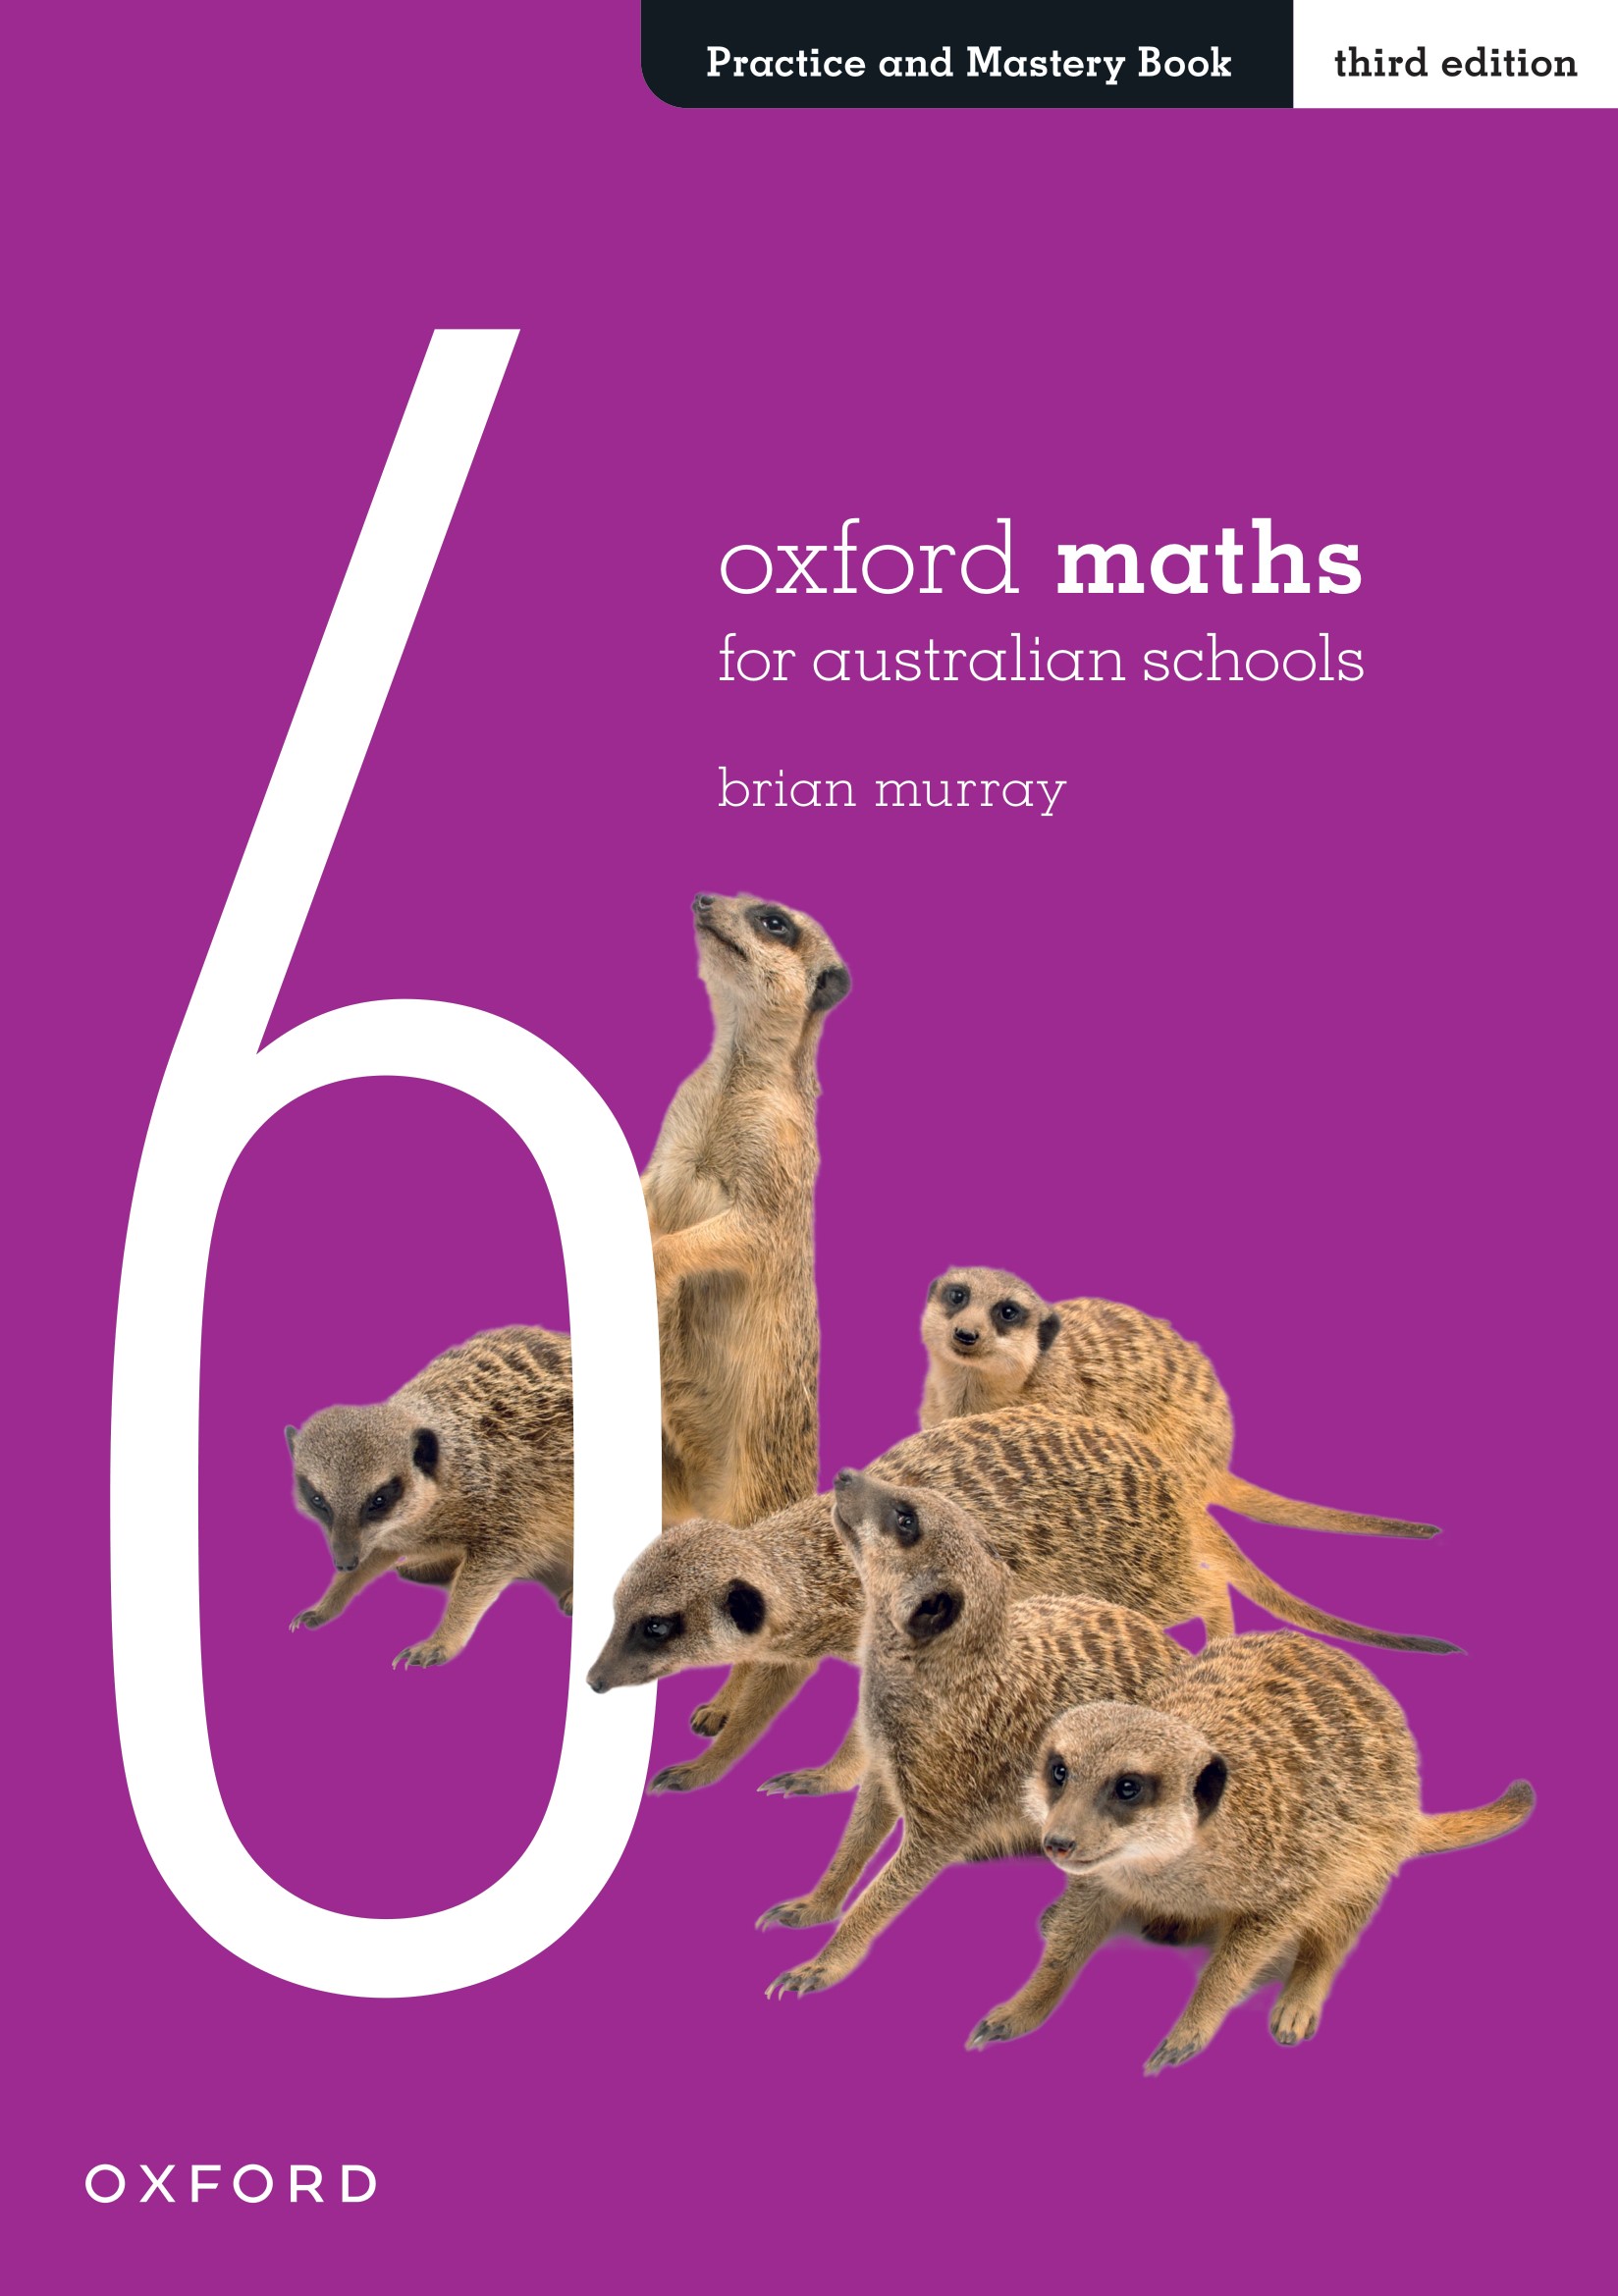 Oxford Maths Practice and Mastery Book Year 6